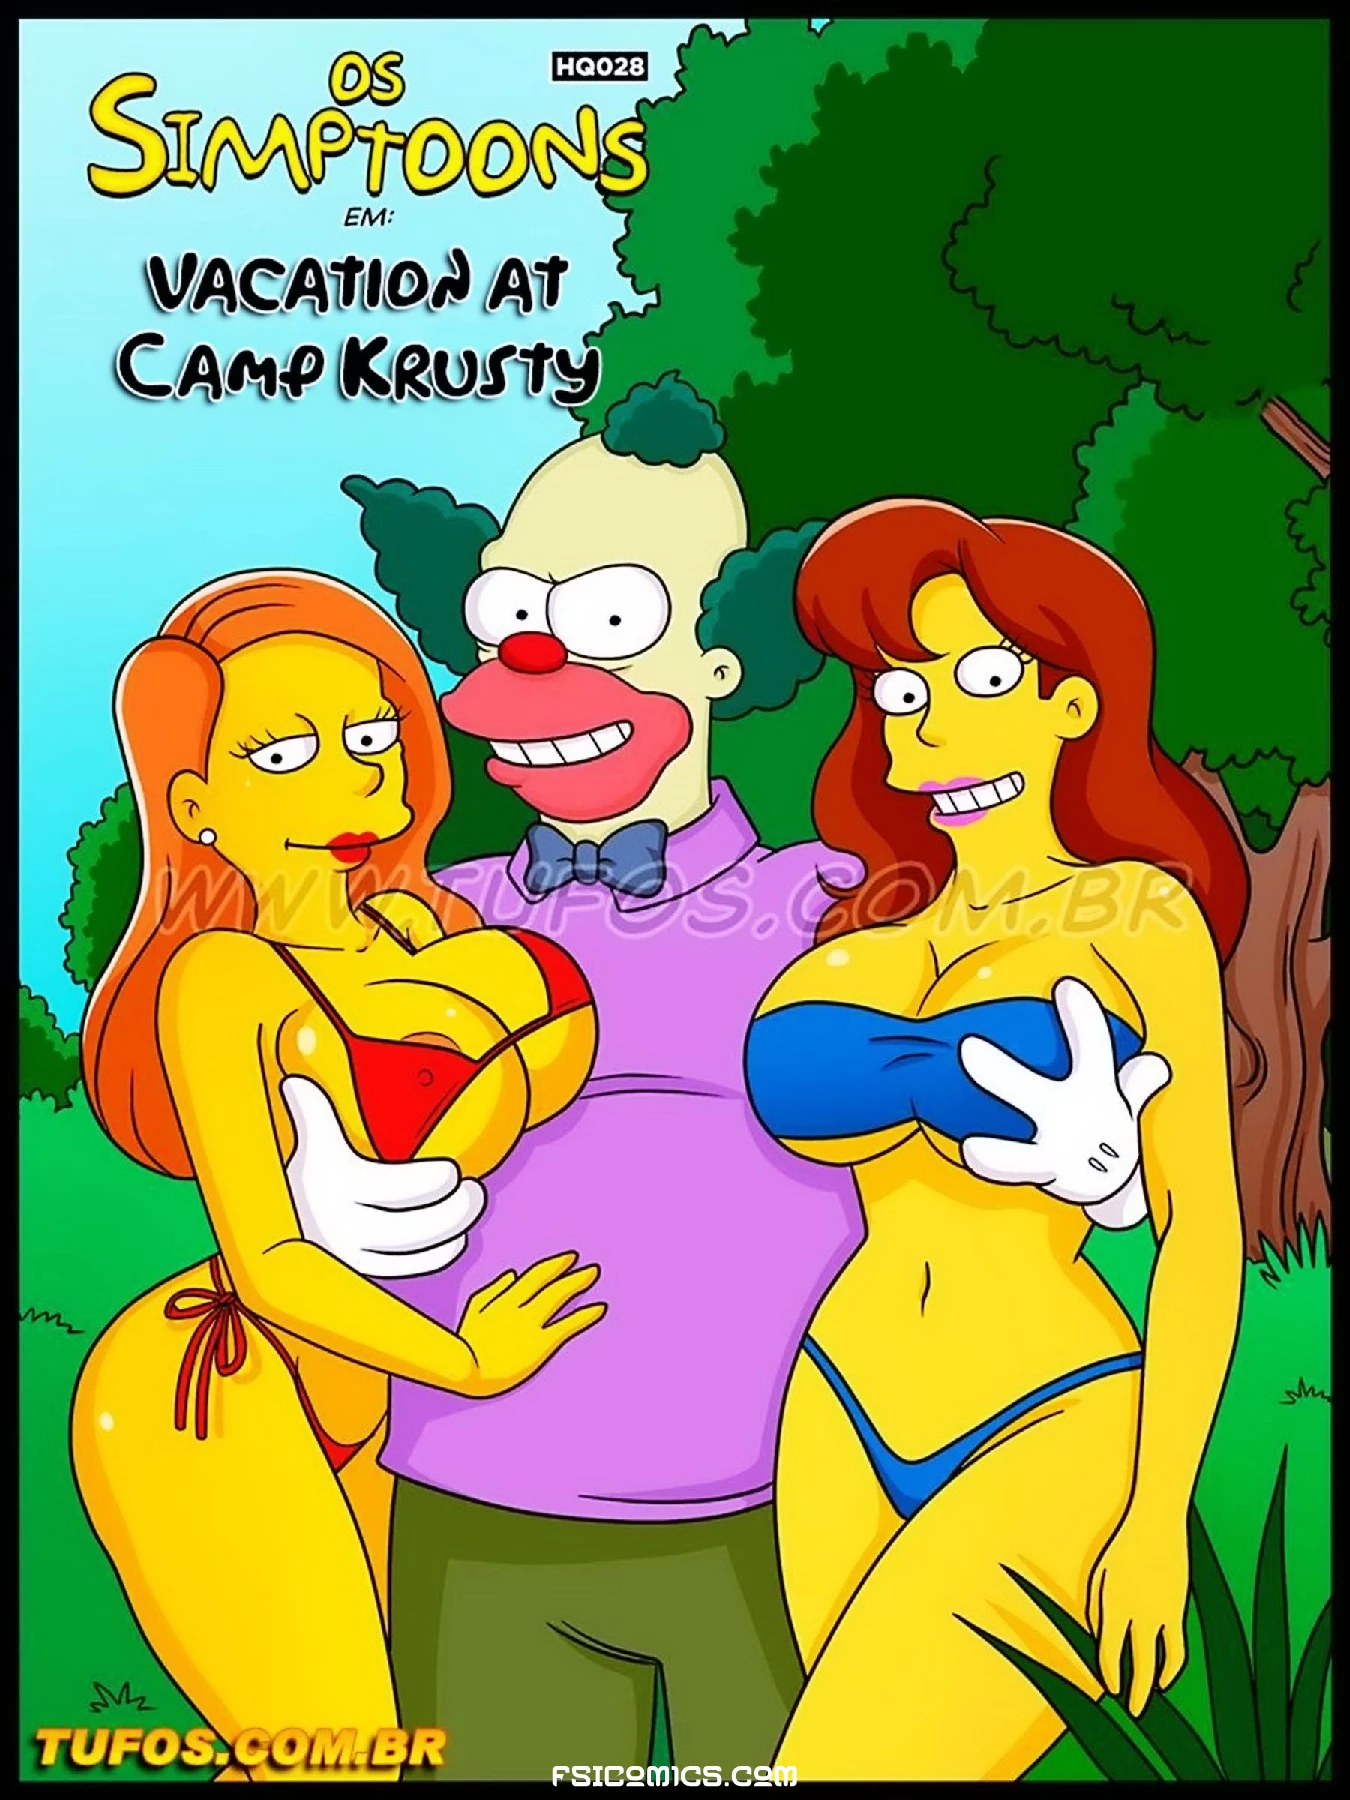 The Simpsons Chapter 28 – Vacation at Camp Krushty – WC TF - 15 - FSIComics